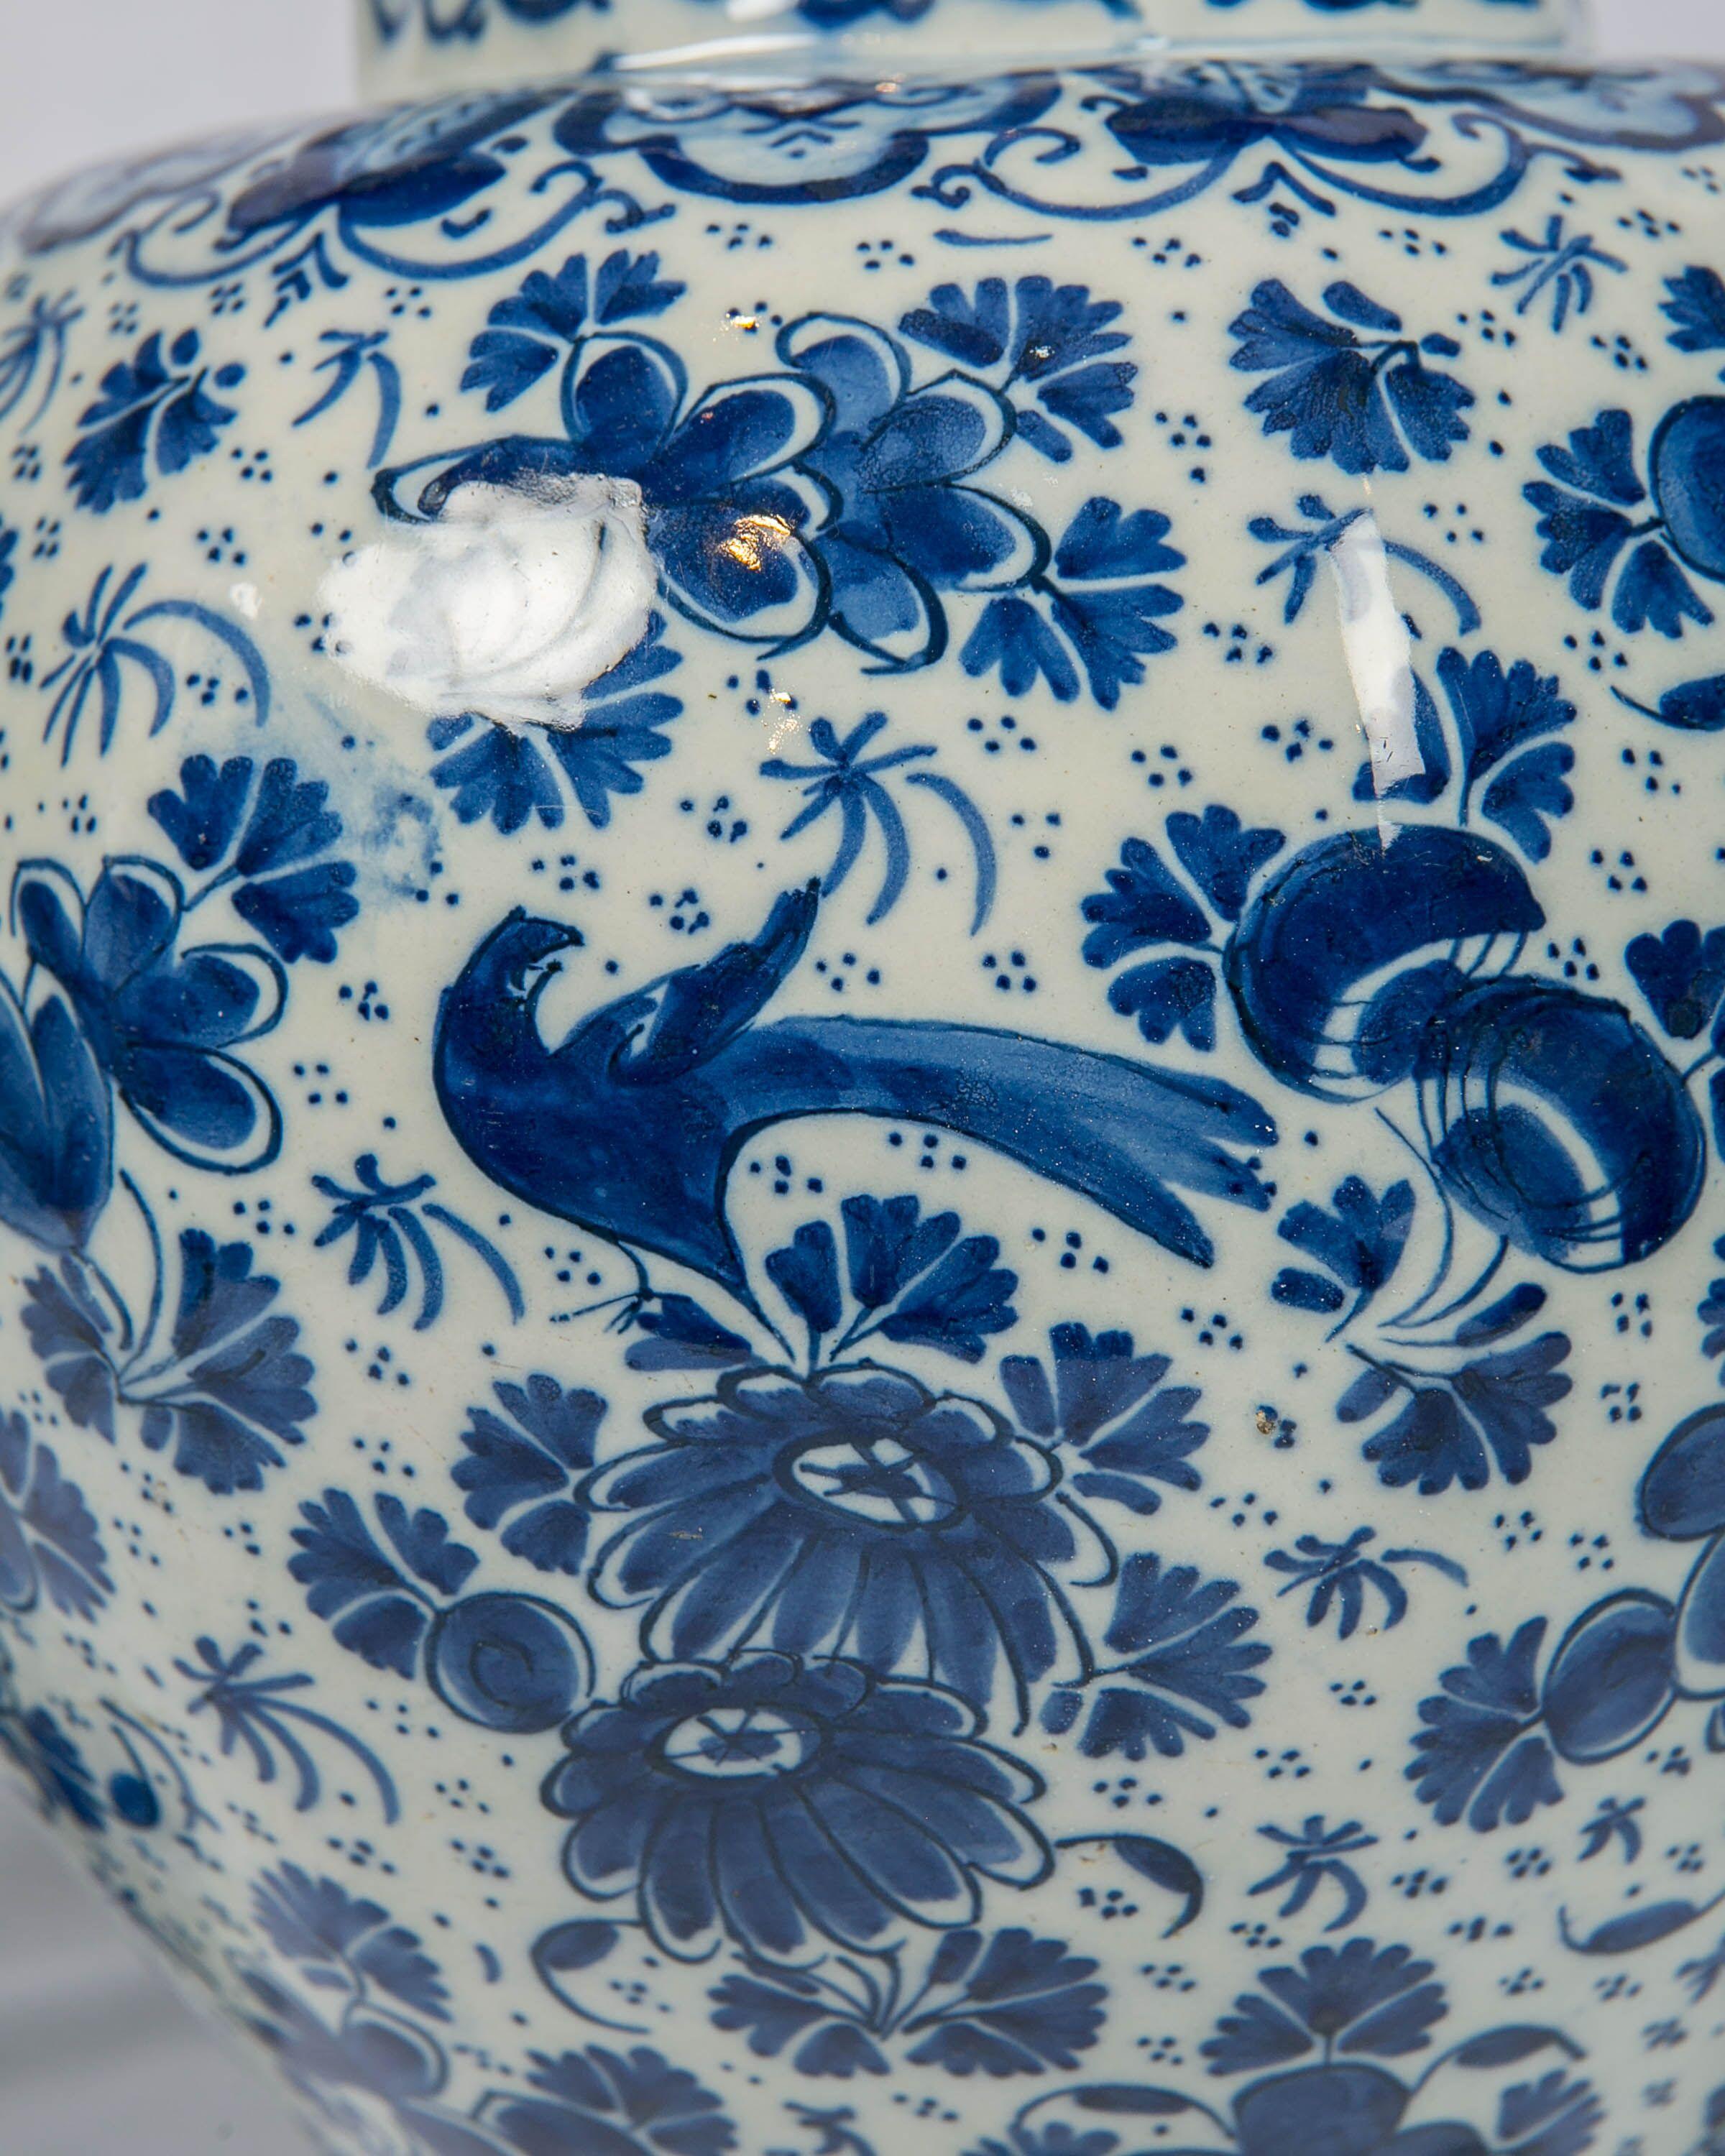 An antique Dutch delft blue and white three-piece garniture consisting of a pair of gourd shaped vases and a single covered vase made circa 1700-1716. This grouping is truly beautiful. All three vases have the mark of Peter Gerritsz. Kam of De Drie